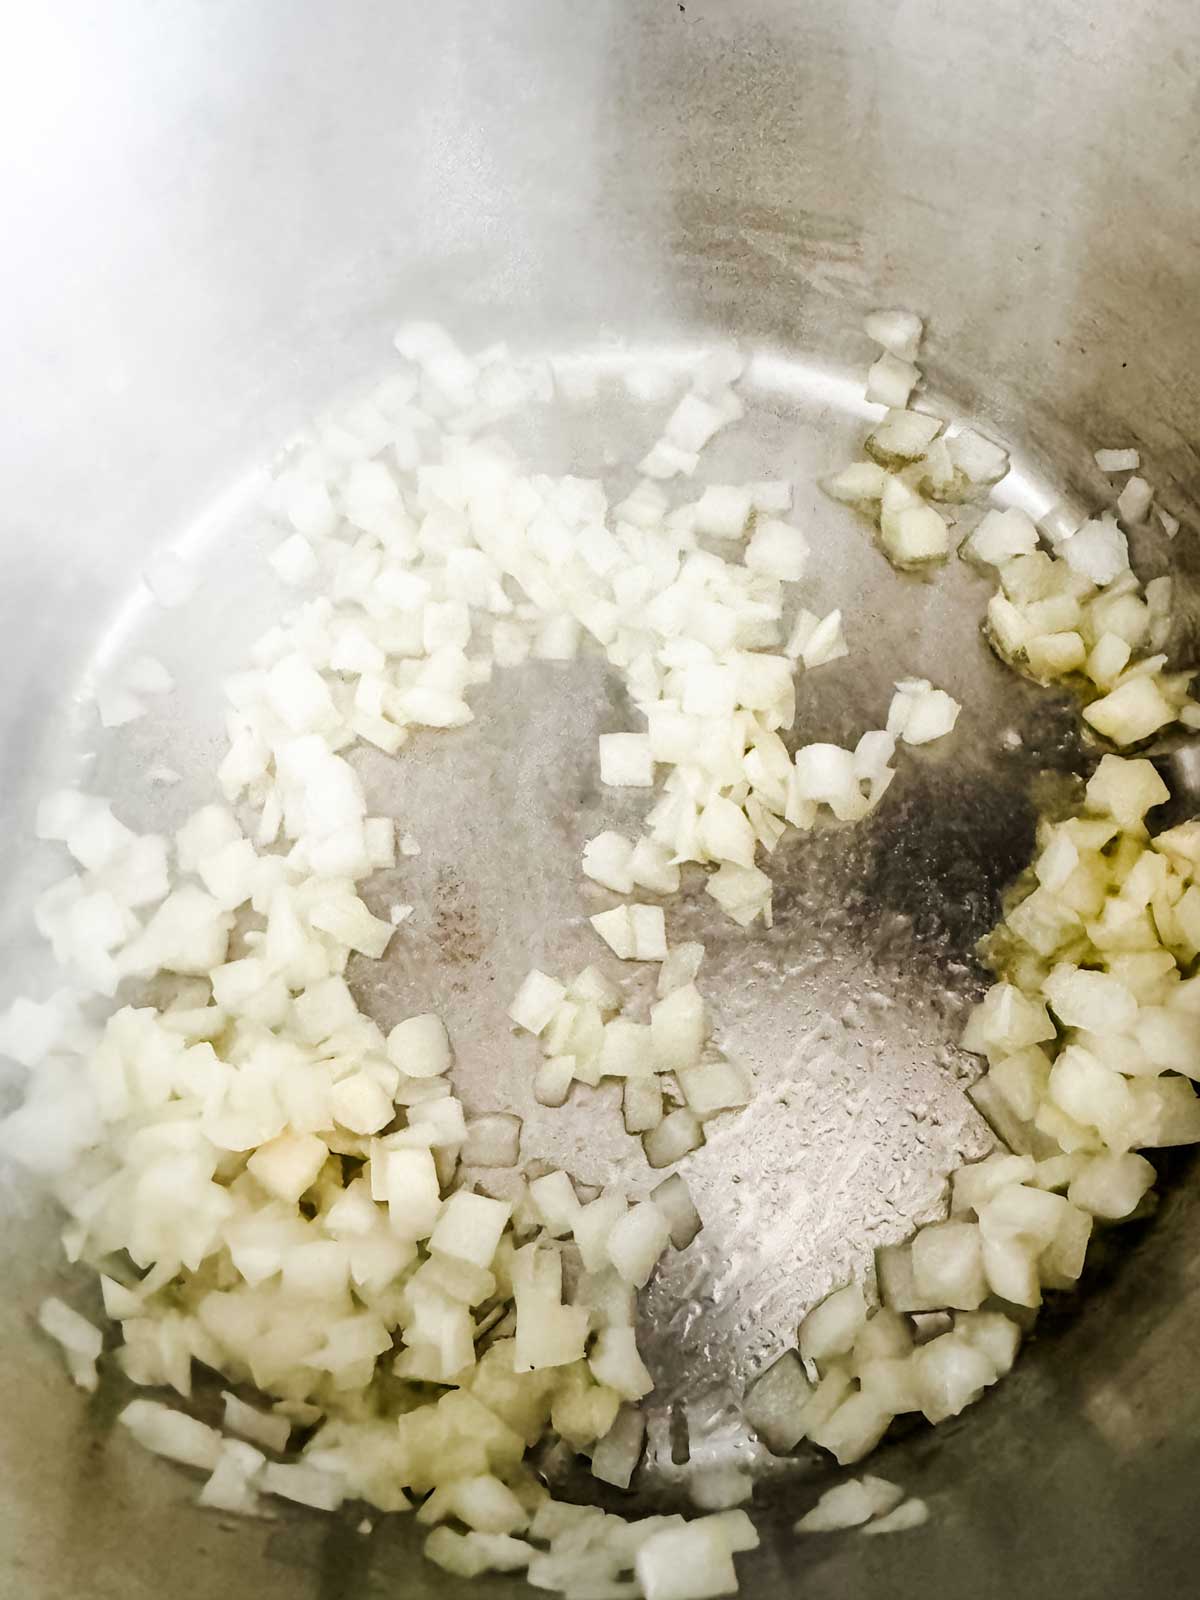 Onion cooking in oil in a saucepan.